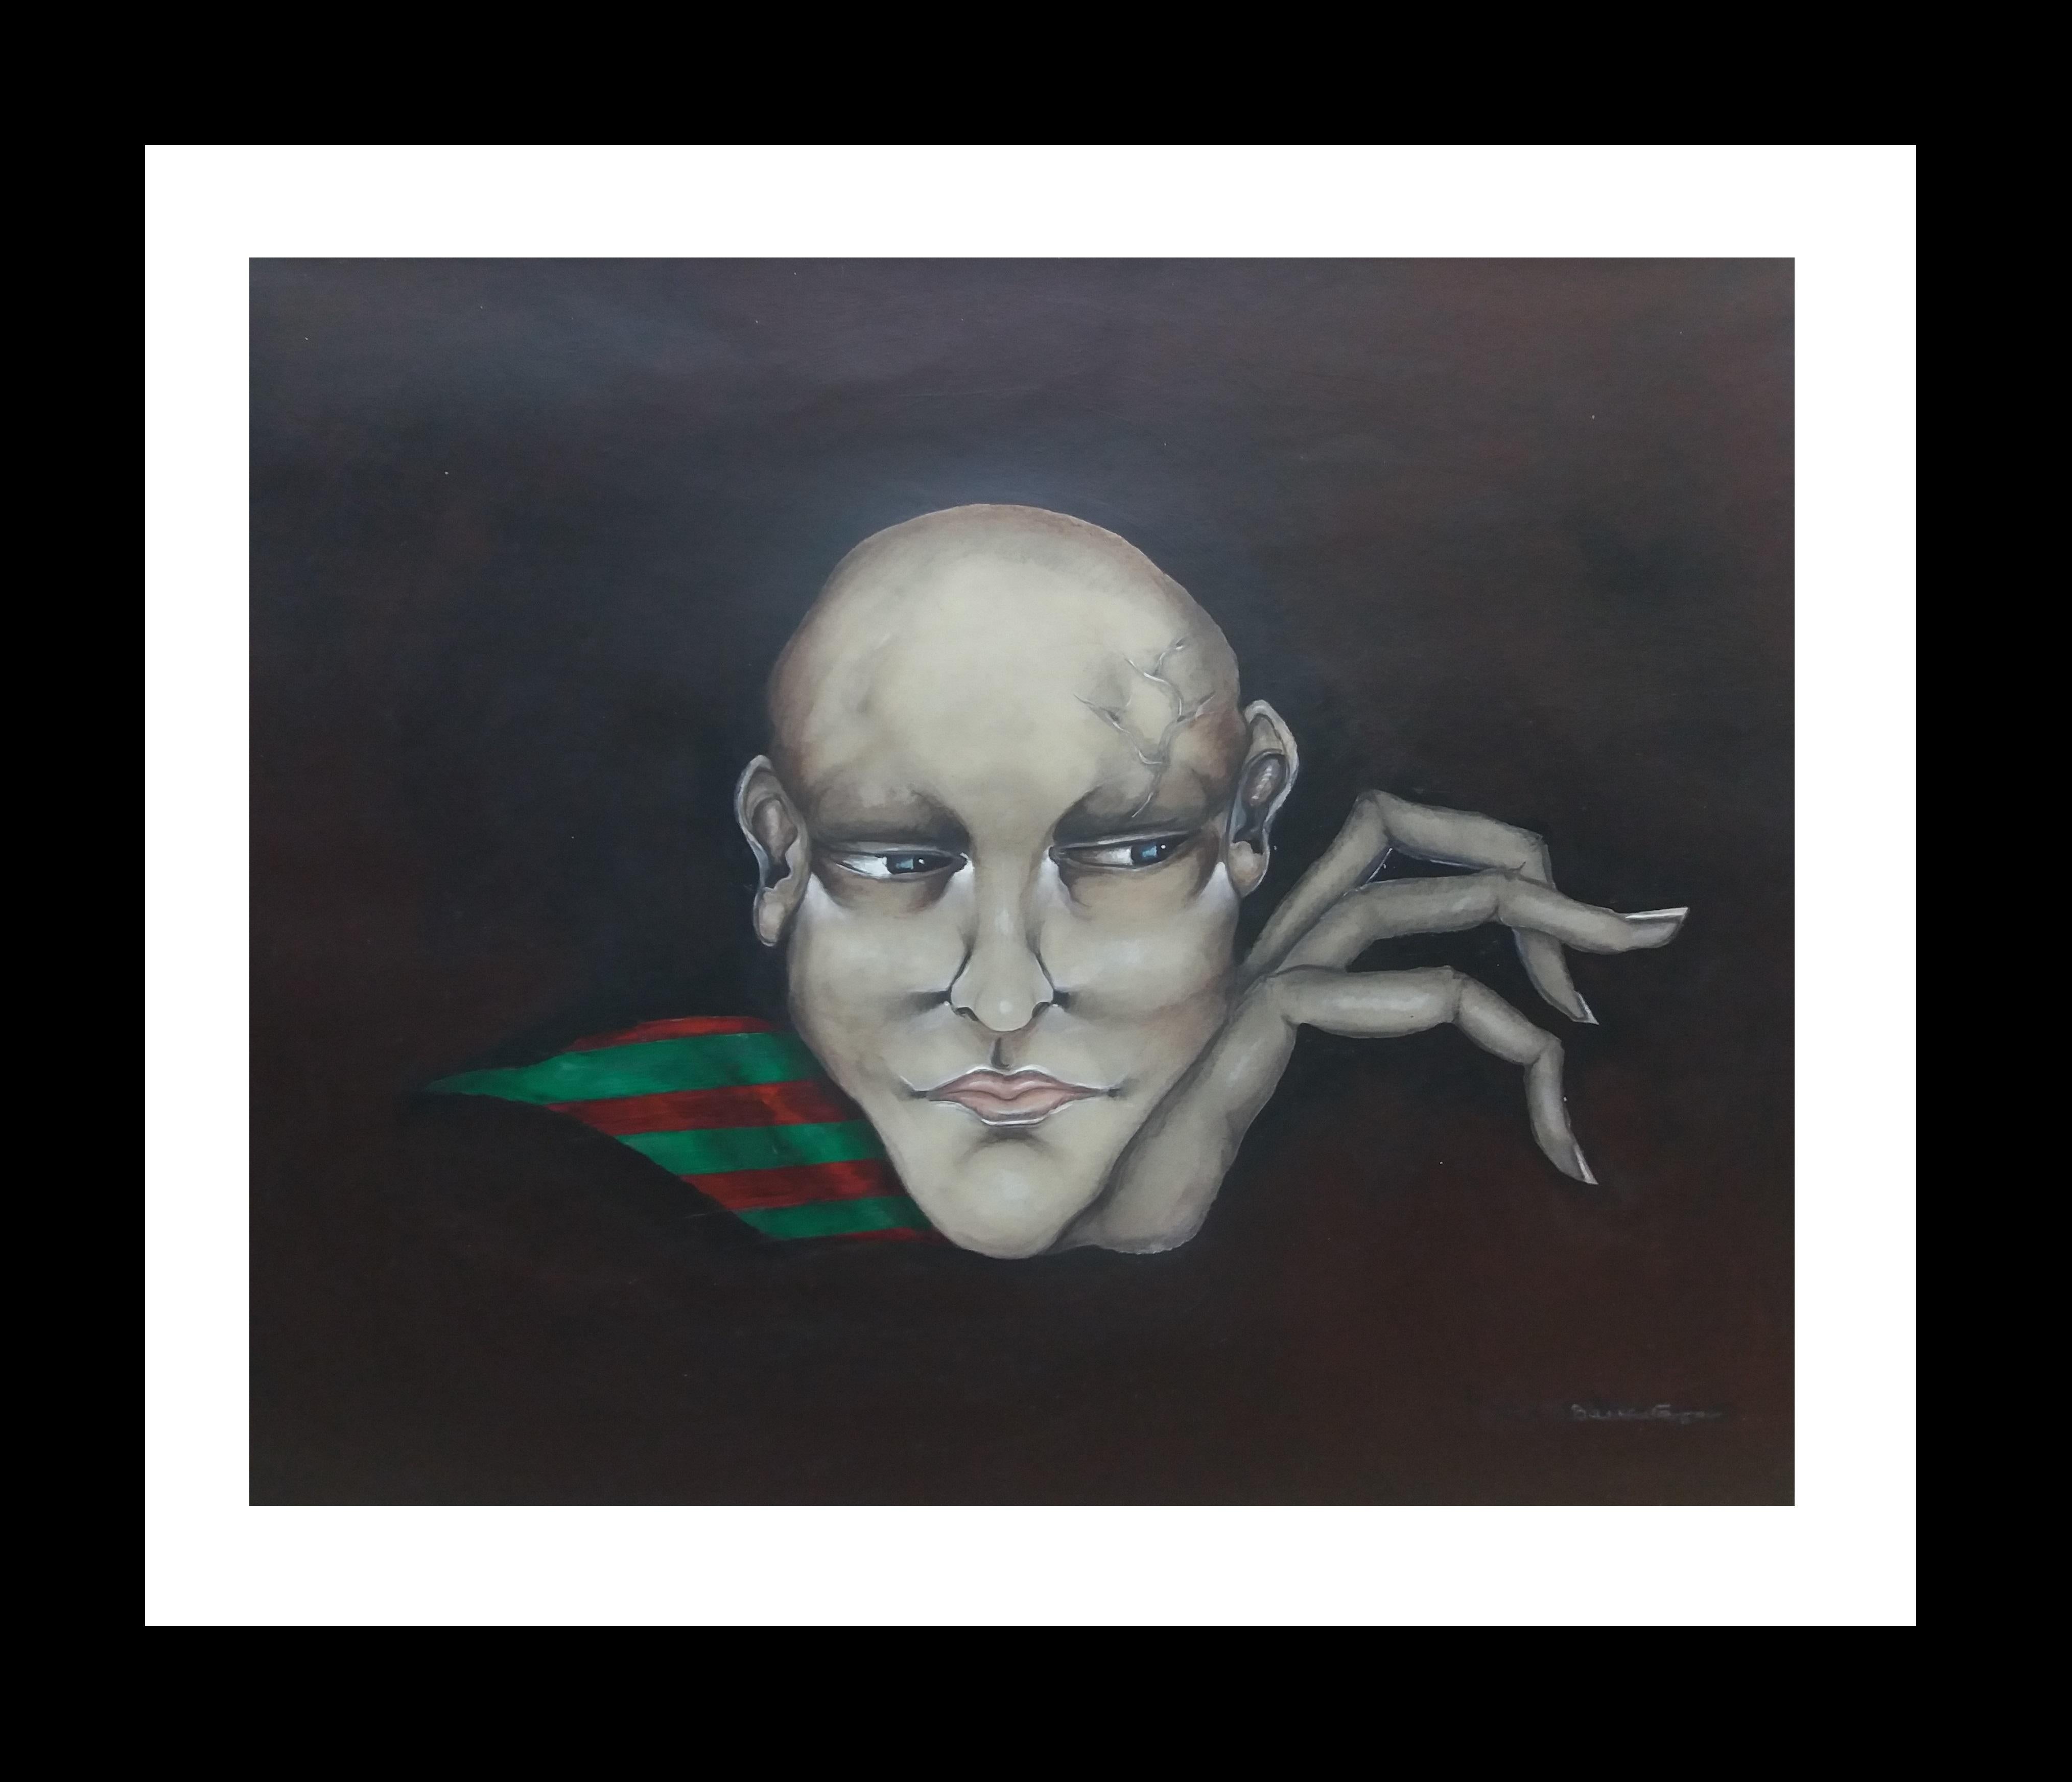 Personaje original surrealist acrylic painting
Cándido Ballester is a contemporary Mallorcan painter who was born in 1926. As a child he had to emigrate to Argentina. In the 60's he began his career as a painter and as early as 1978 he decided to